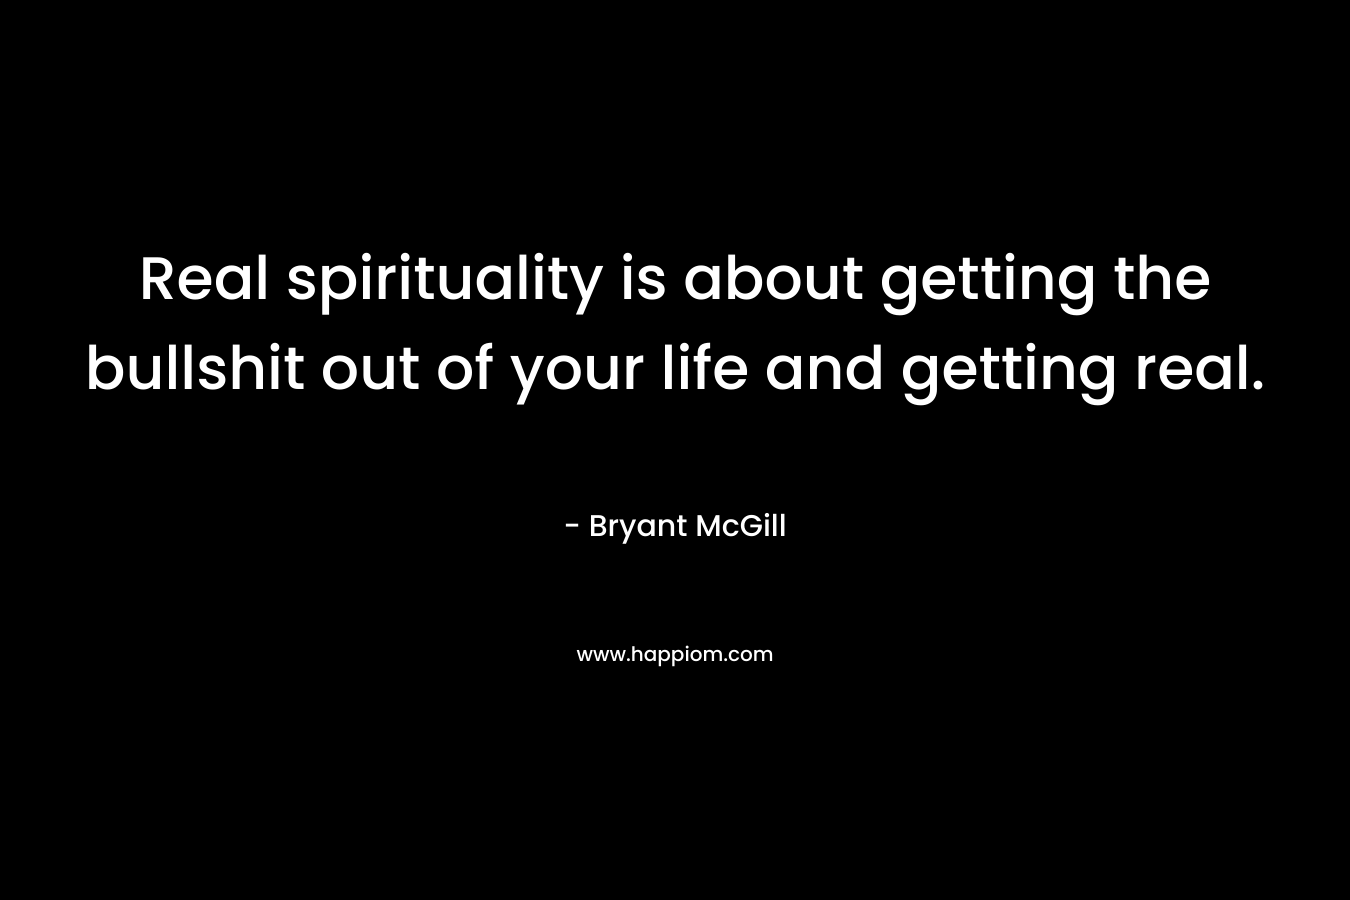 Real spirituality is about getting the bullshit out of your life and getting real.